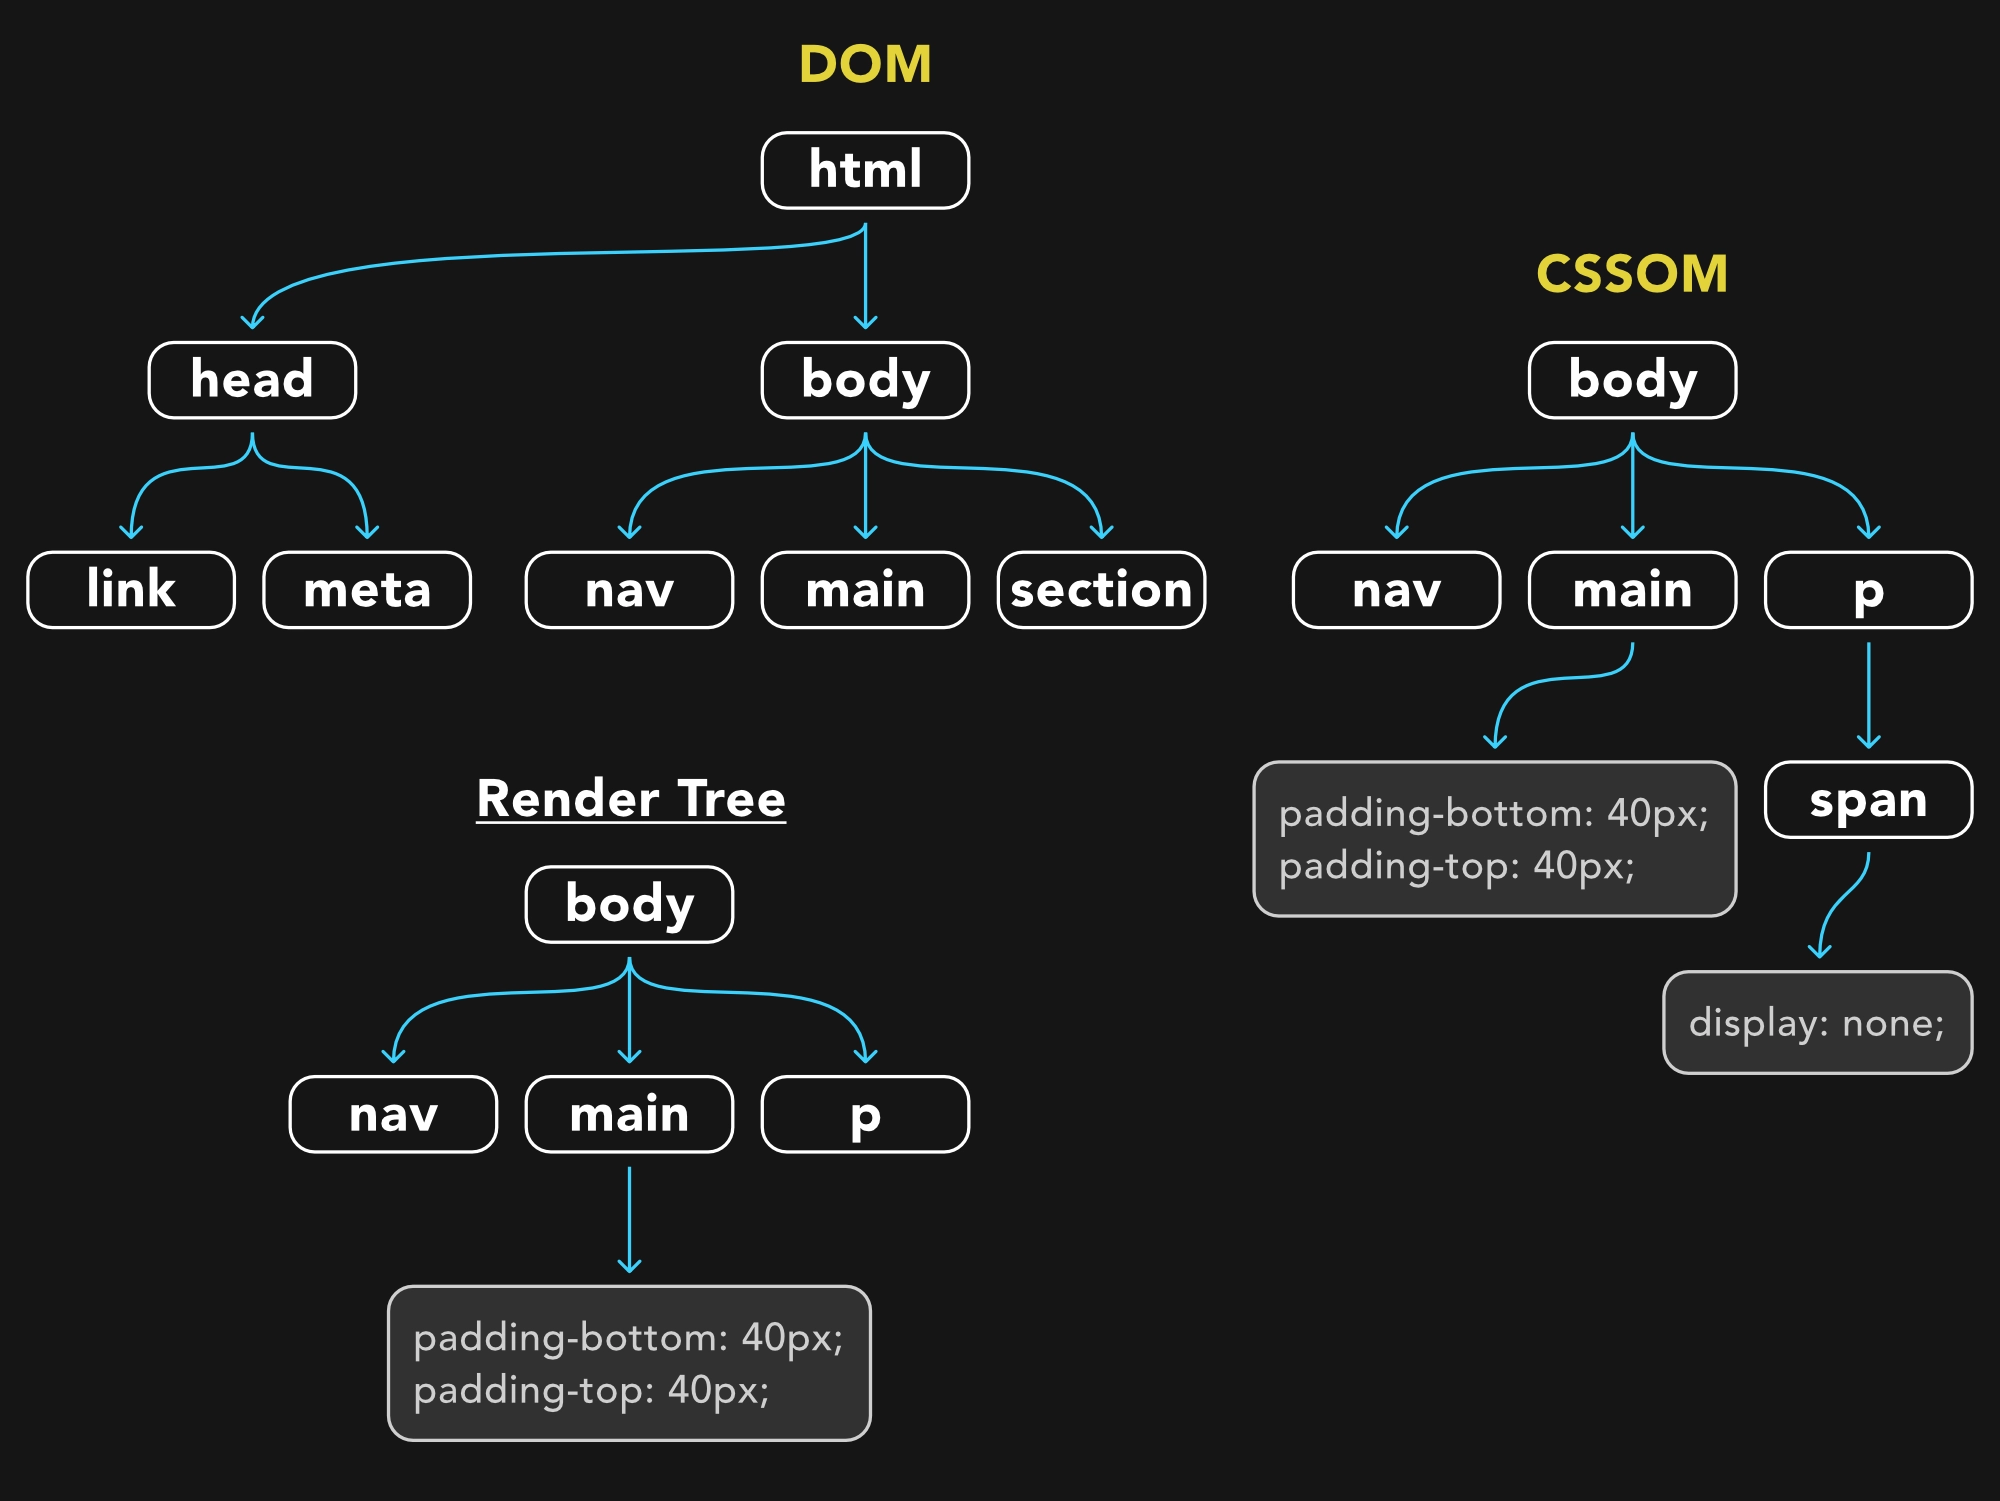 DOM and CSSOM render tree